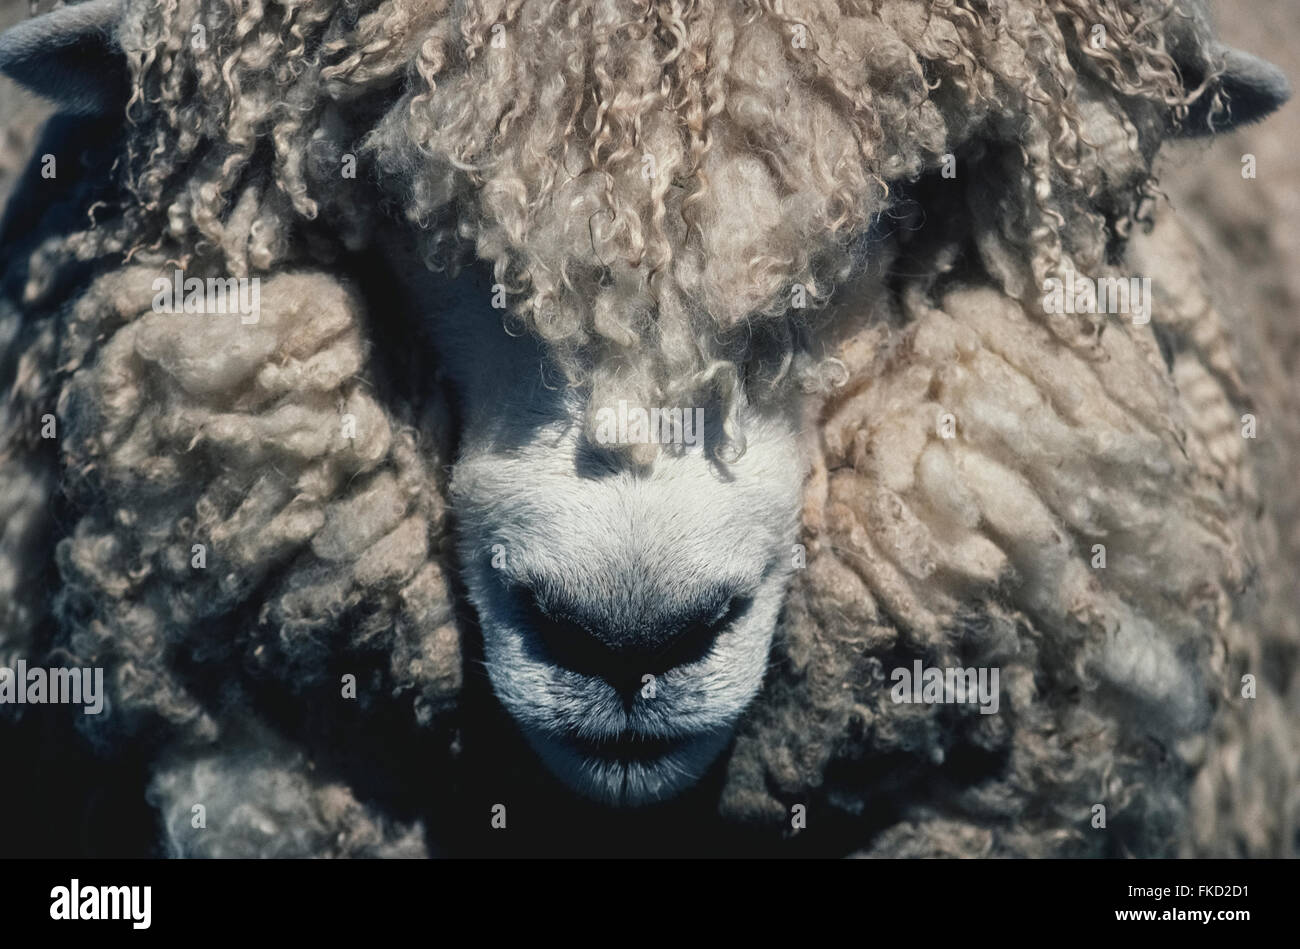 The thick woolly coat of this New Zealand sheep hides most of of its face. New Zealand's sheep population has dropped to about 30 million (2015) but that nation's iconic farm animal still outnumbers its people six to one. Stock Photo